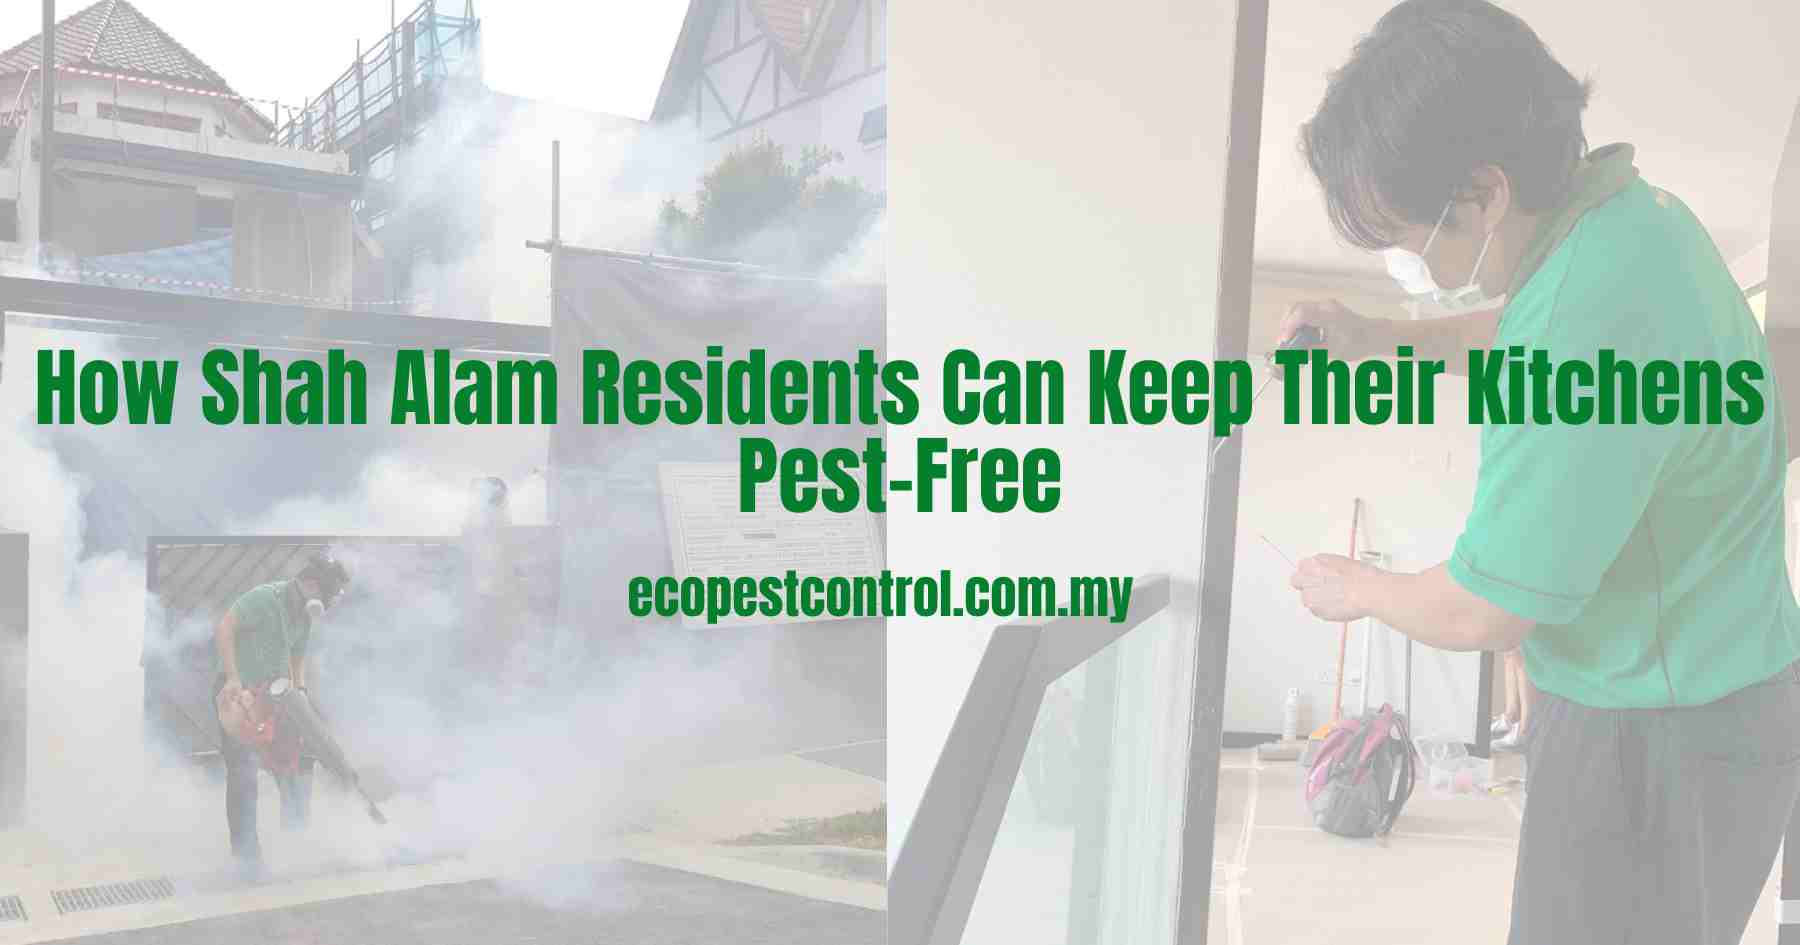 How Shah Alam Residents Can Keep Their Kitchens Pest-Free